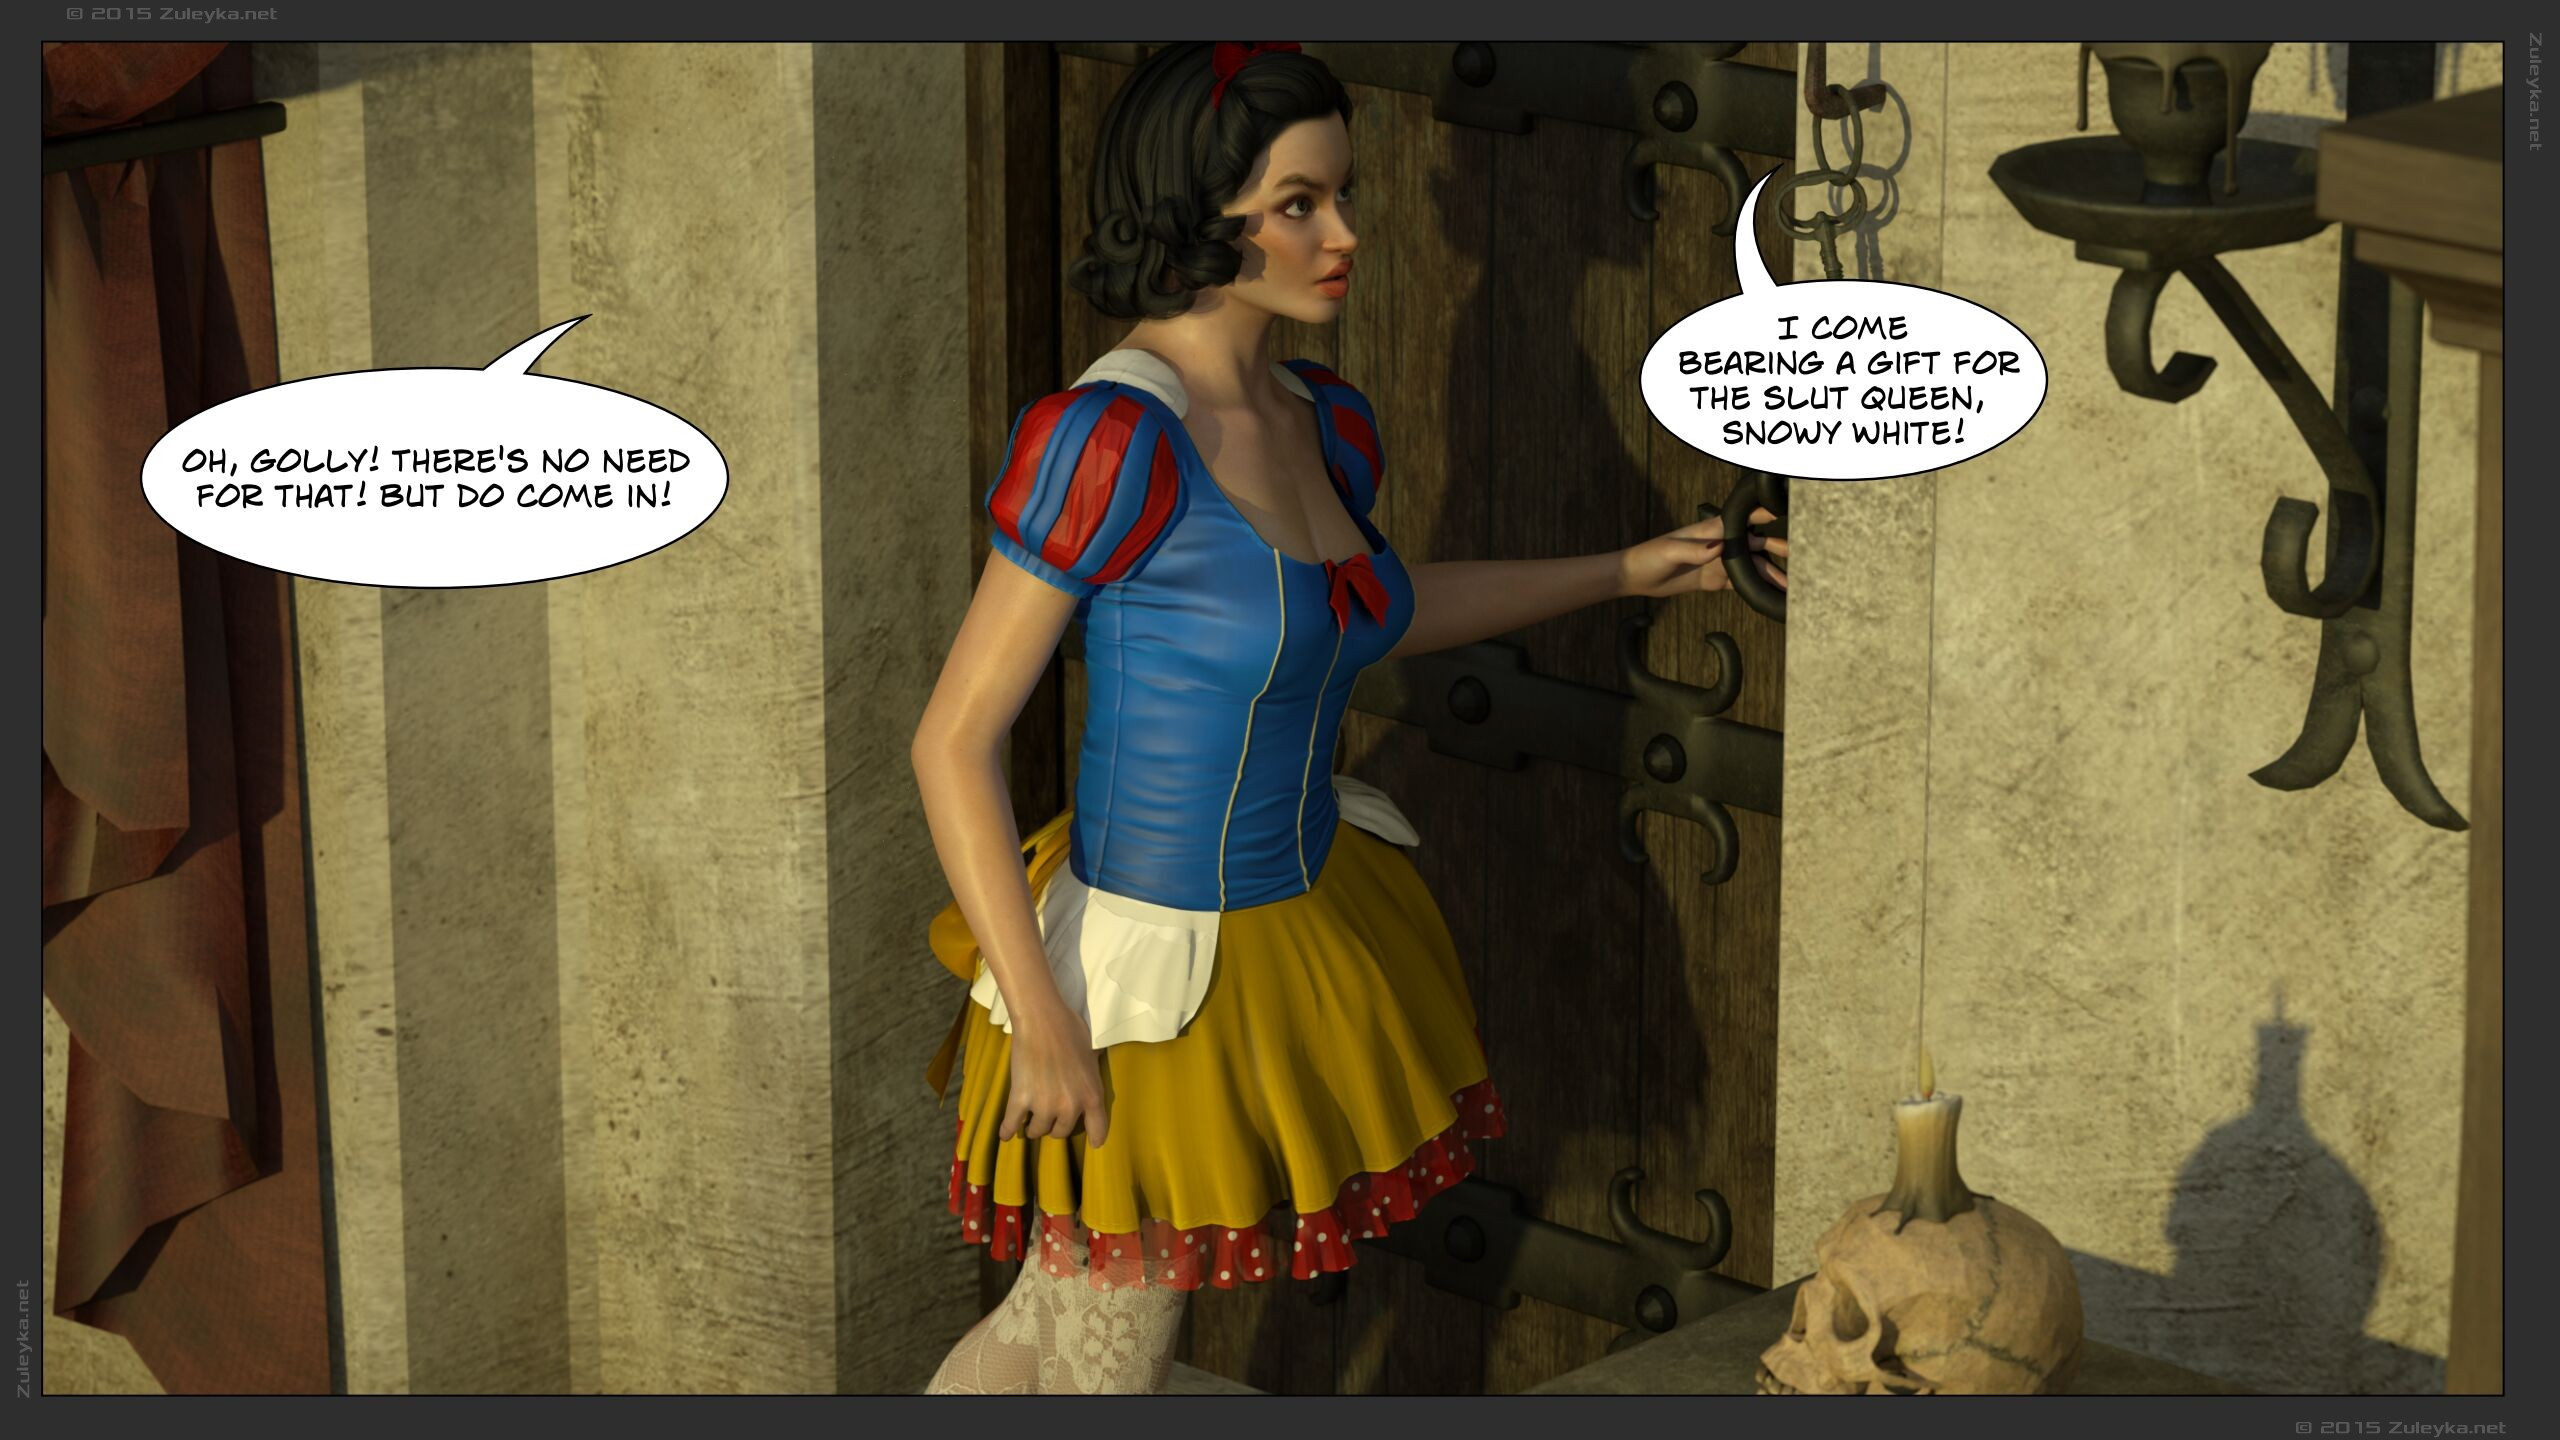 Snow-White-Meets-the-Queen-page02--Gotofap.tk--30525888.jpg